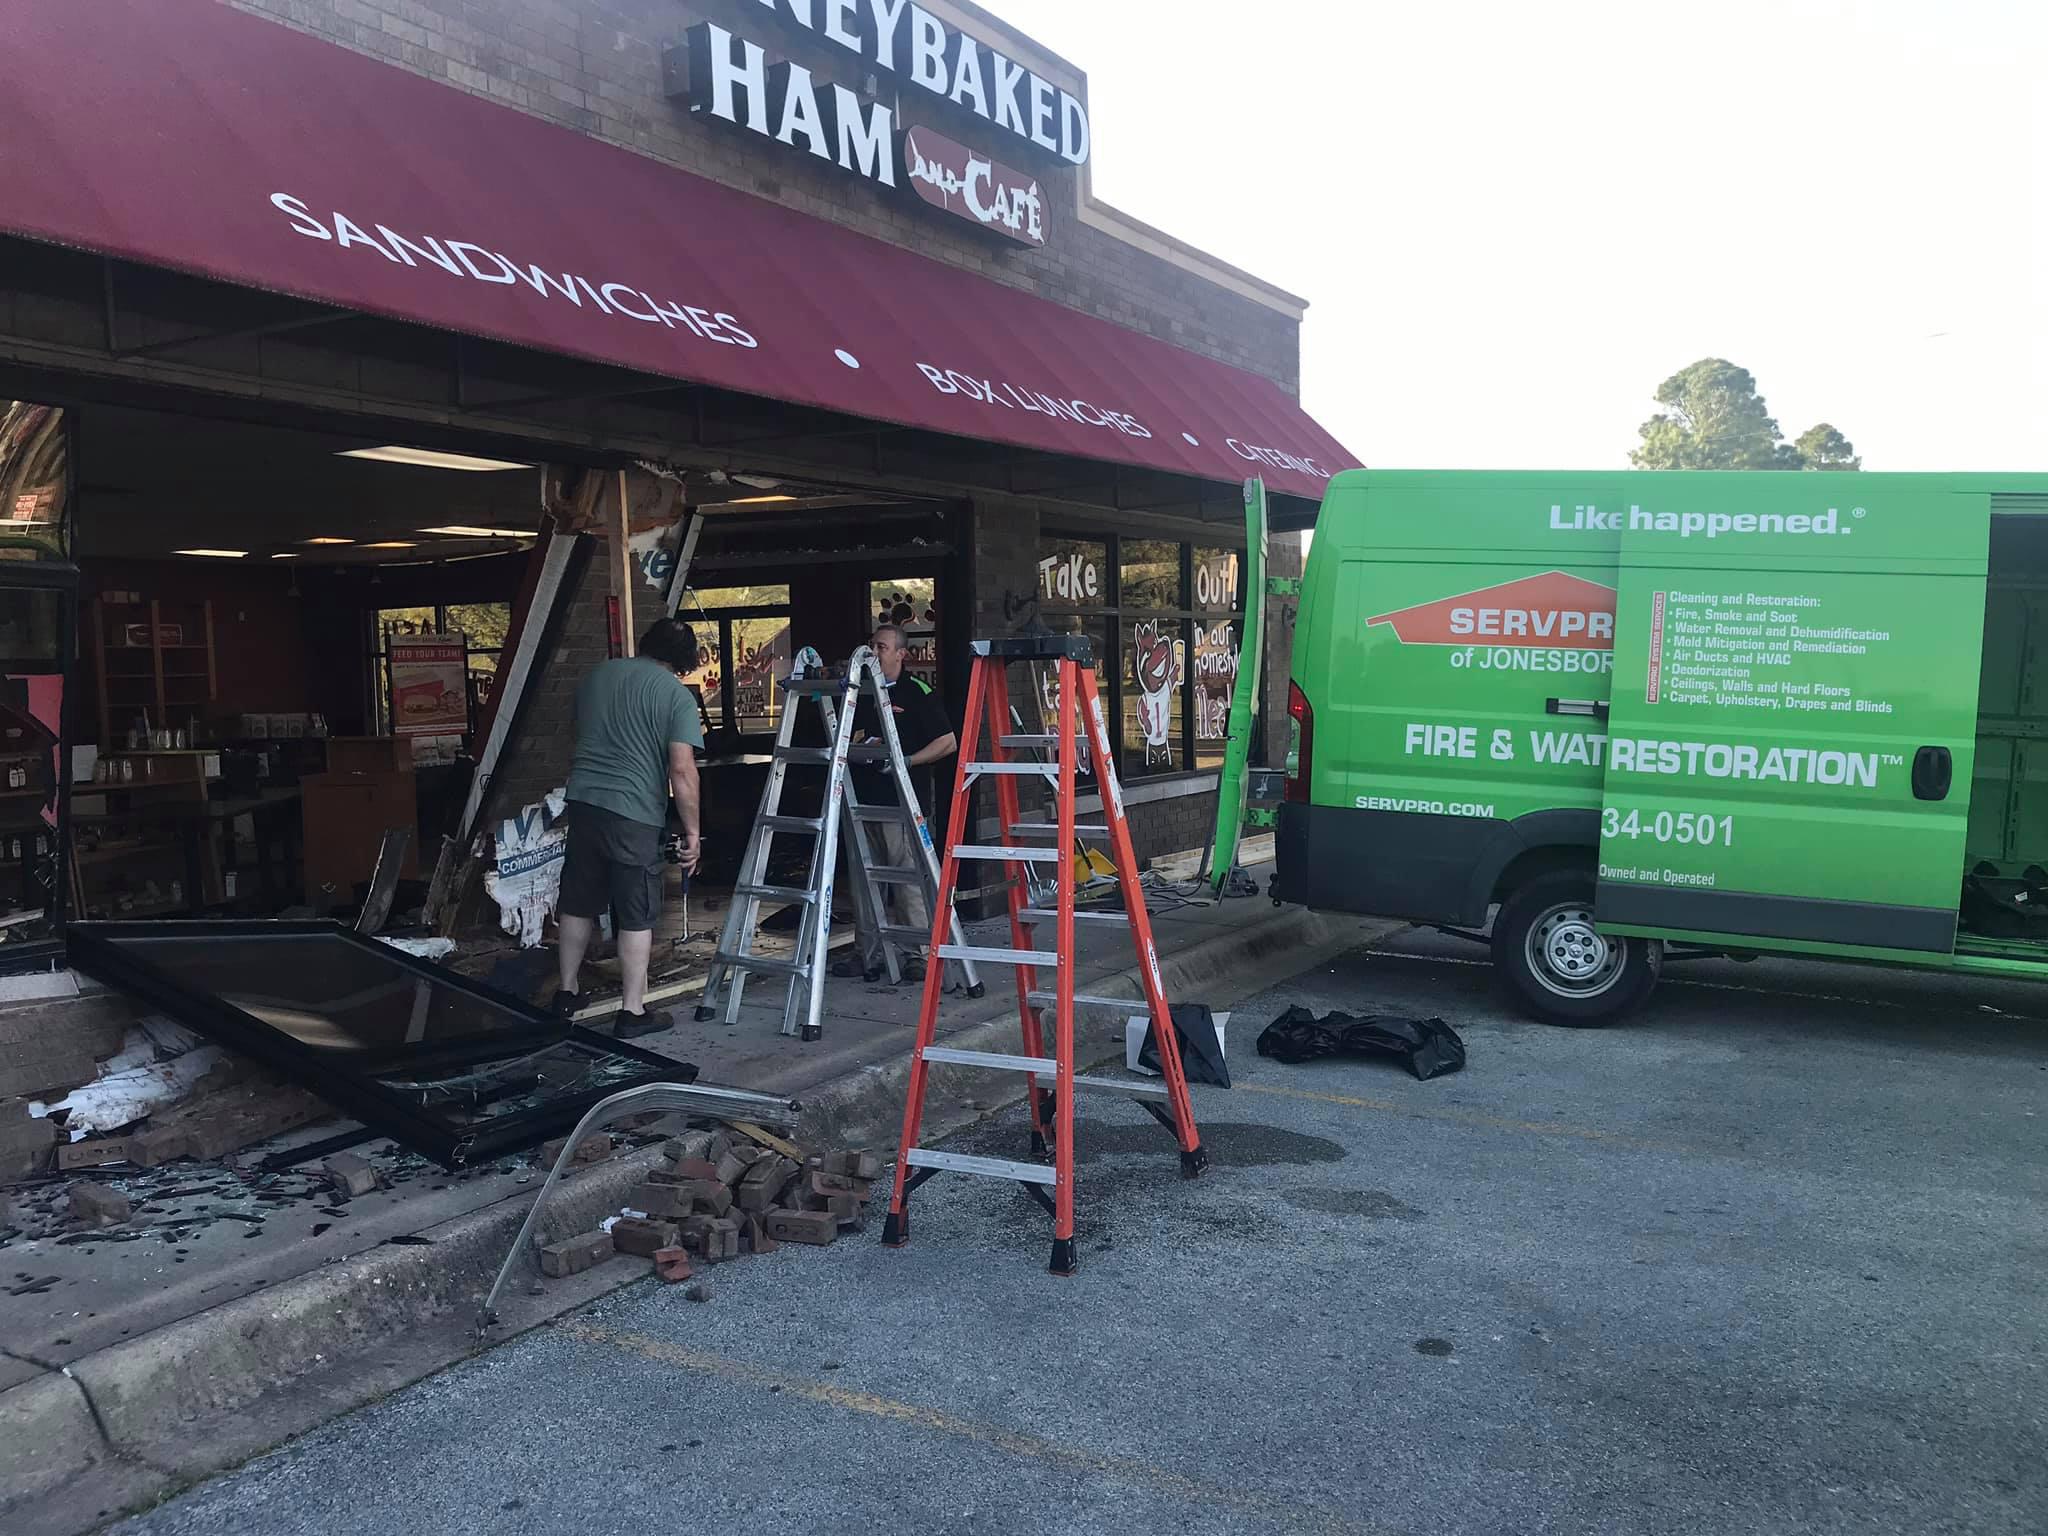 SERVPRO team working to restore The Honey Baked Ham Company after a crash occurred.